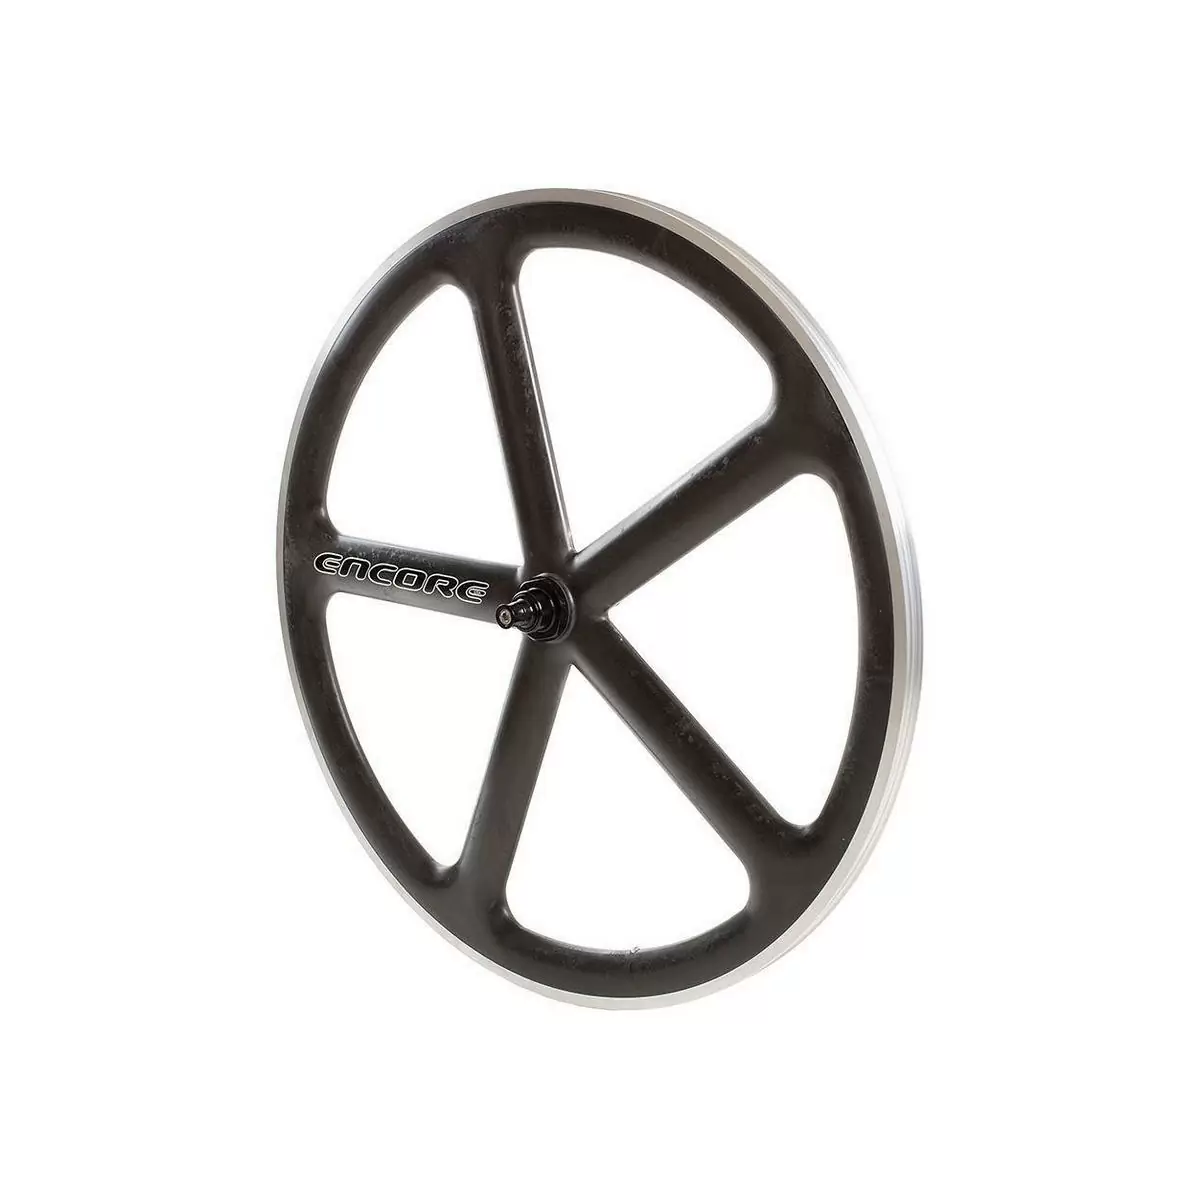 front wheel 700c track 5 spokes carbon weave natural msw #1